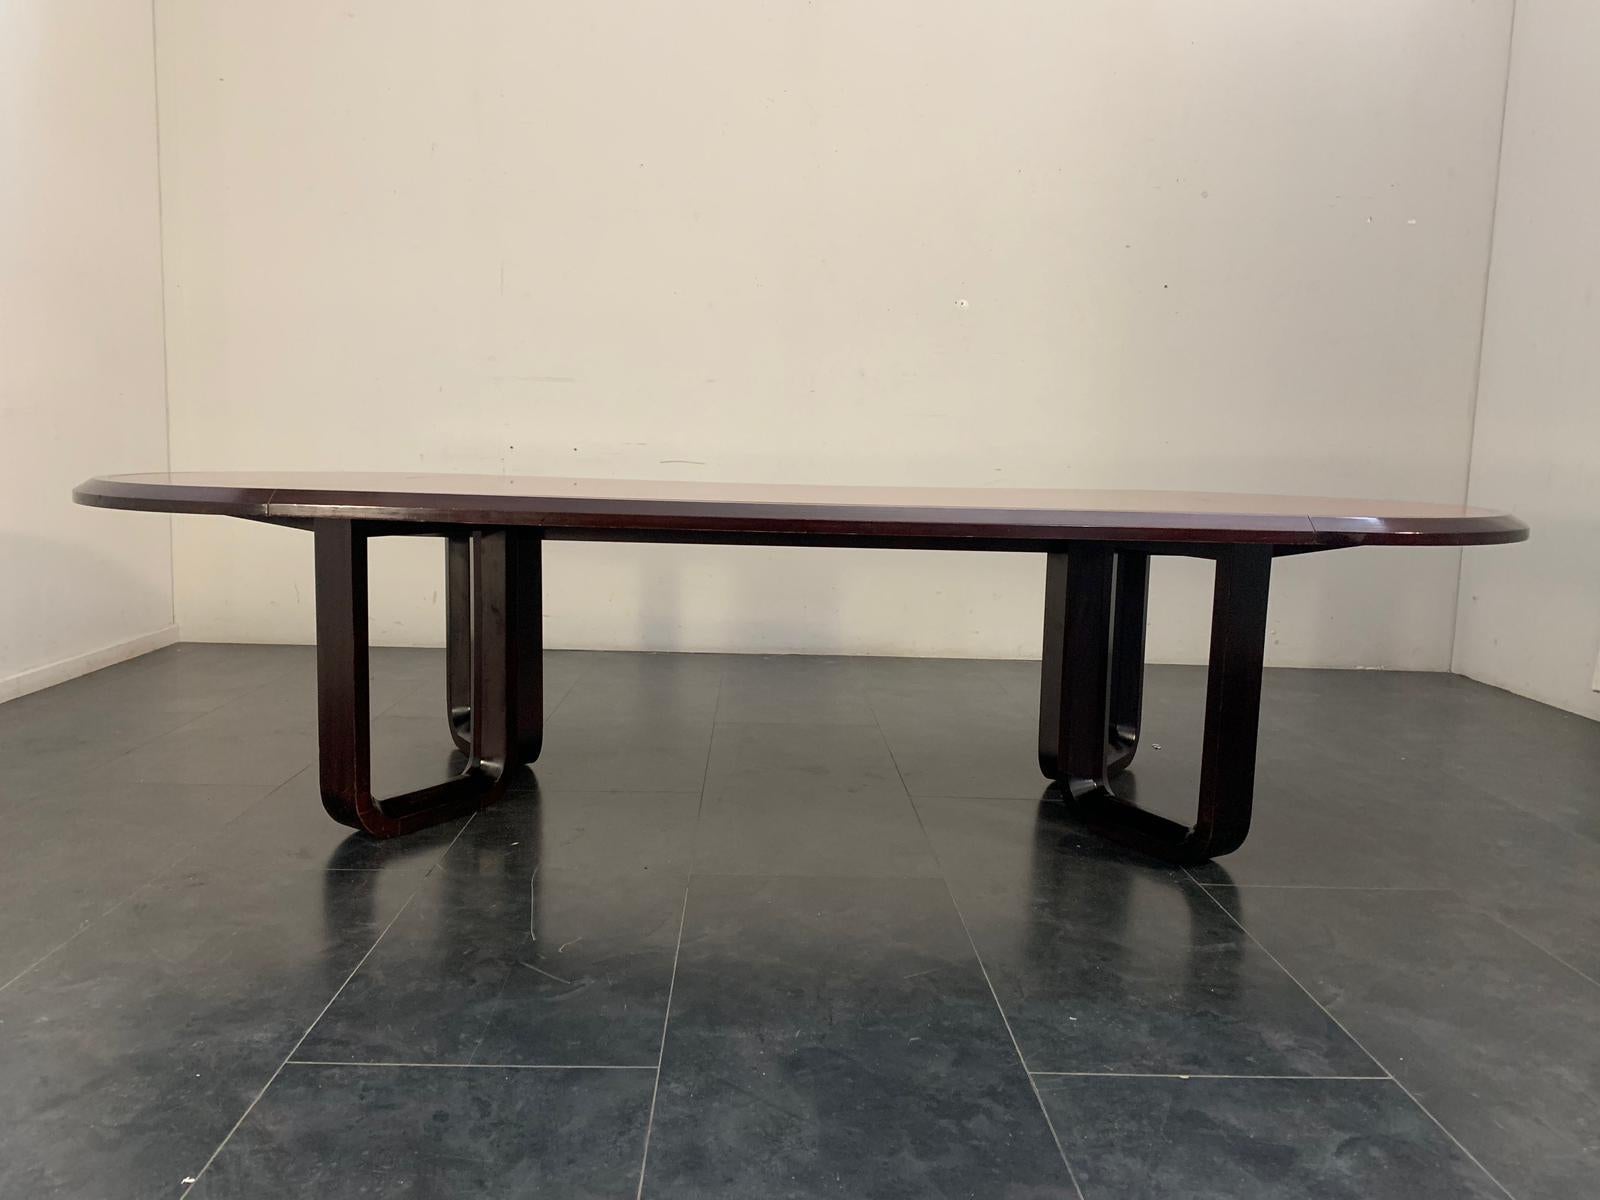 Large elliptical table, probably made on commission; 4 curved and shaped supports in solid mahogany support the oval top with a triumph of selected solid rosewood in the center framed by a sloping band composed of 7 mahogany profiles of about 1 cm